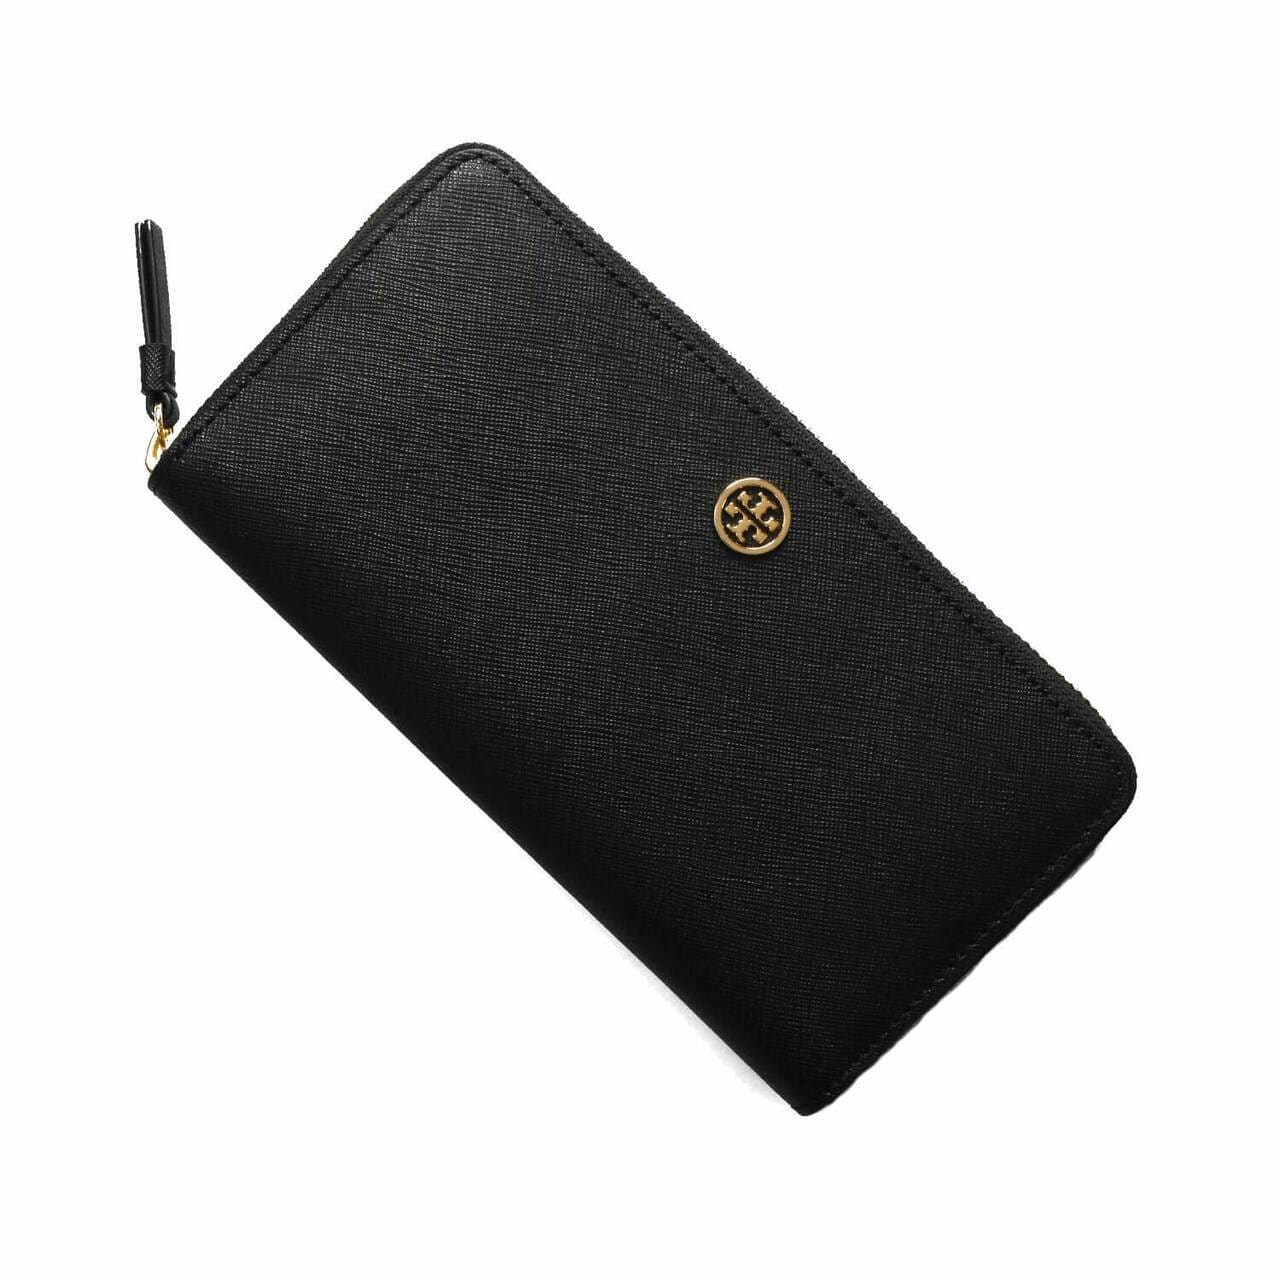 Tory Burch Robinson Zip Continental Black Leather Wallet TB 54448-001 192485105797